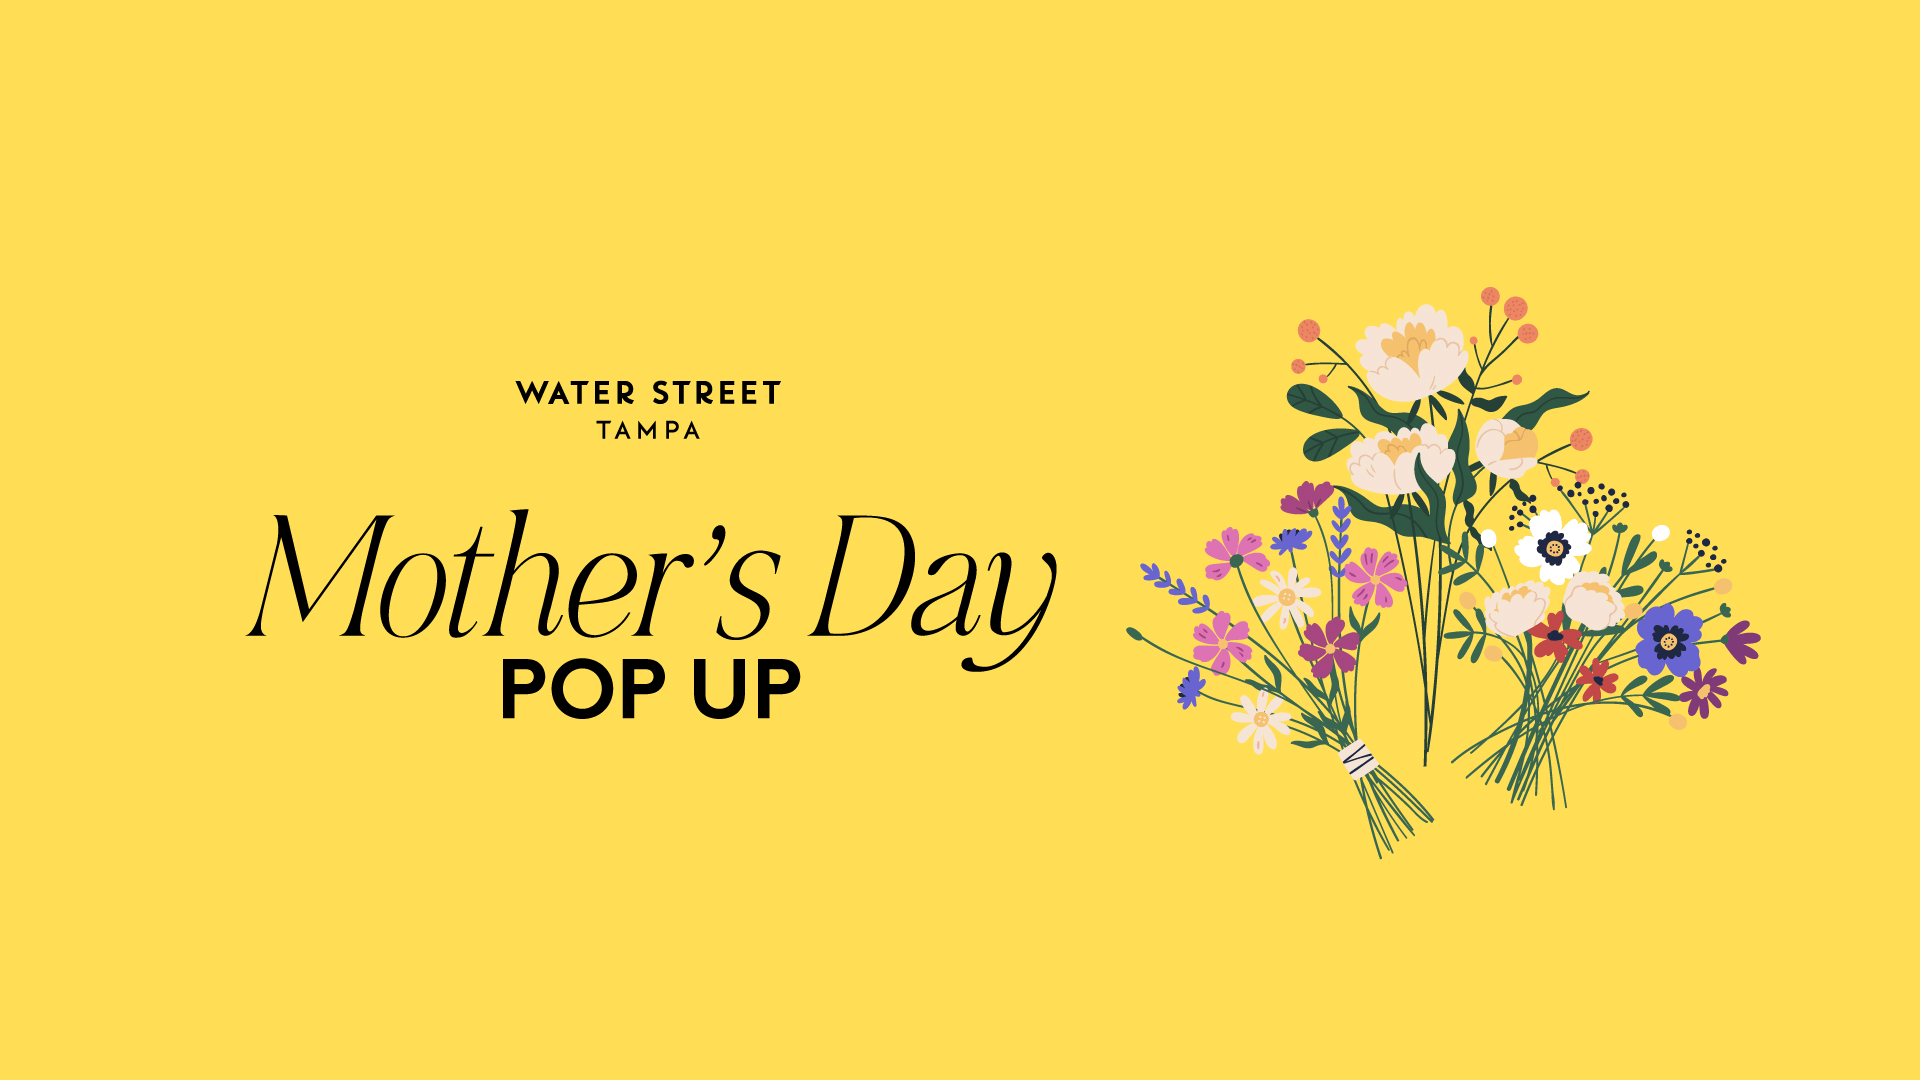 Graphic for Mother's Day pop up in Water Street Tampa